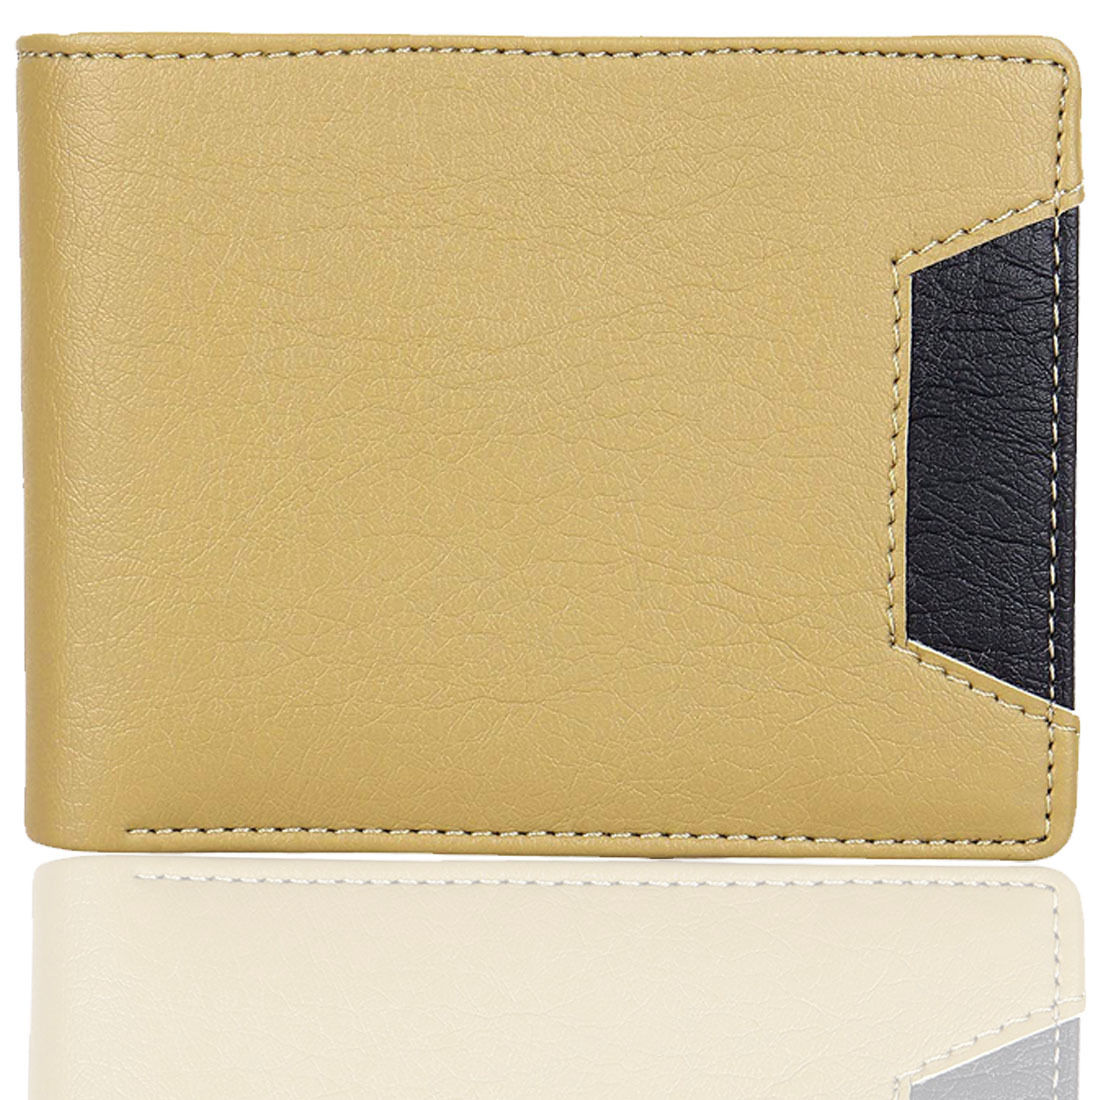 Leather Front Pocket Wallet - Fox Creek Leather